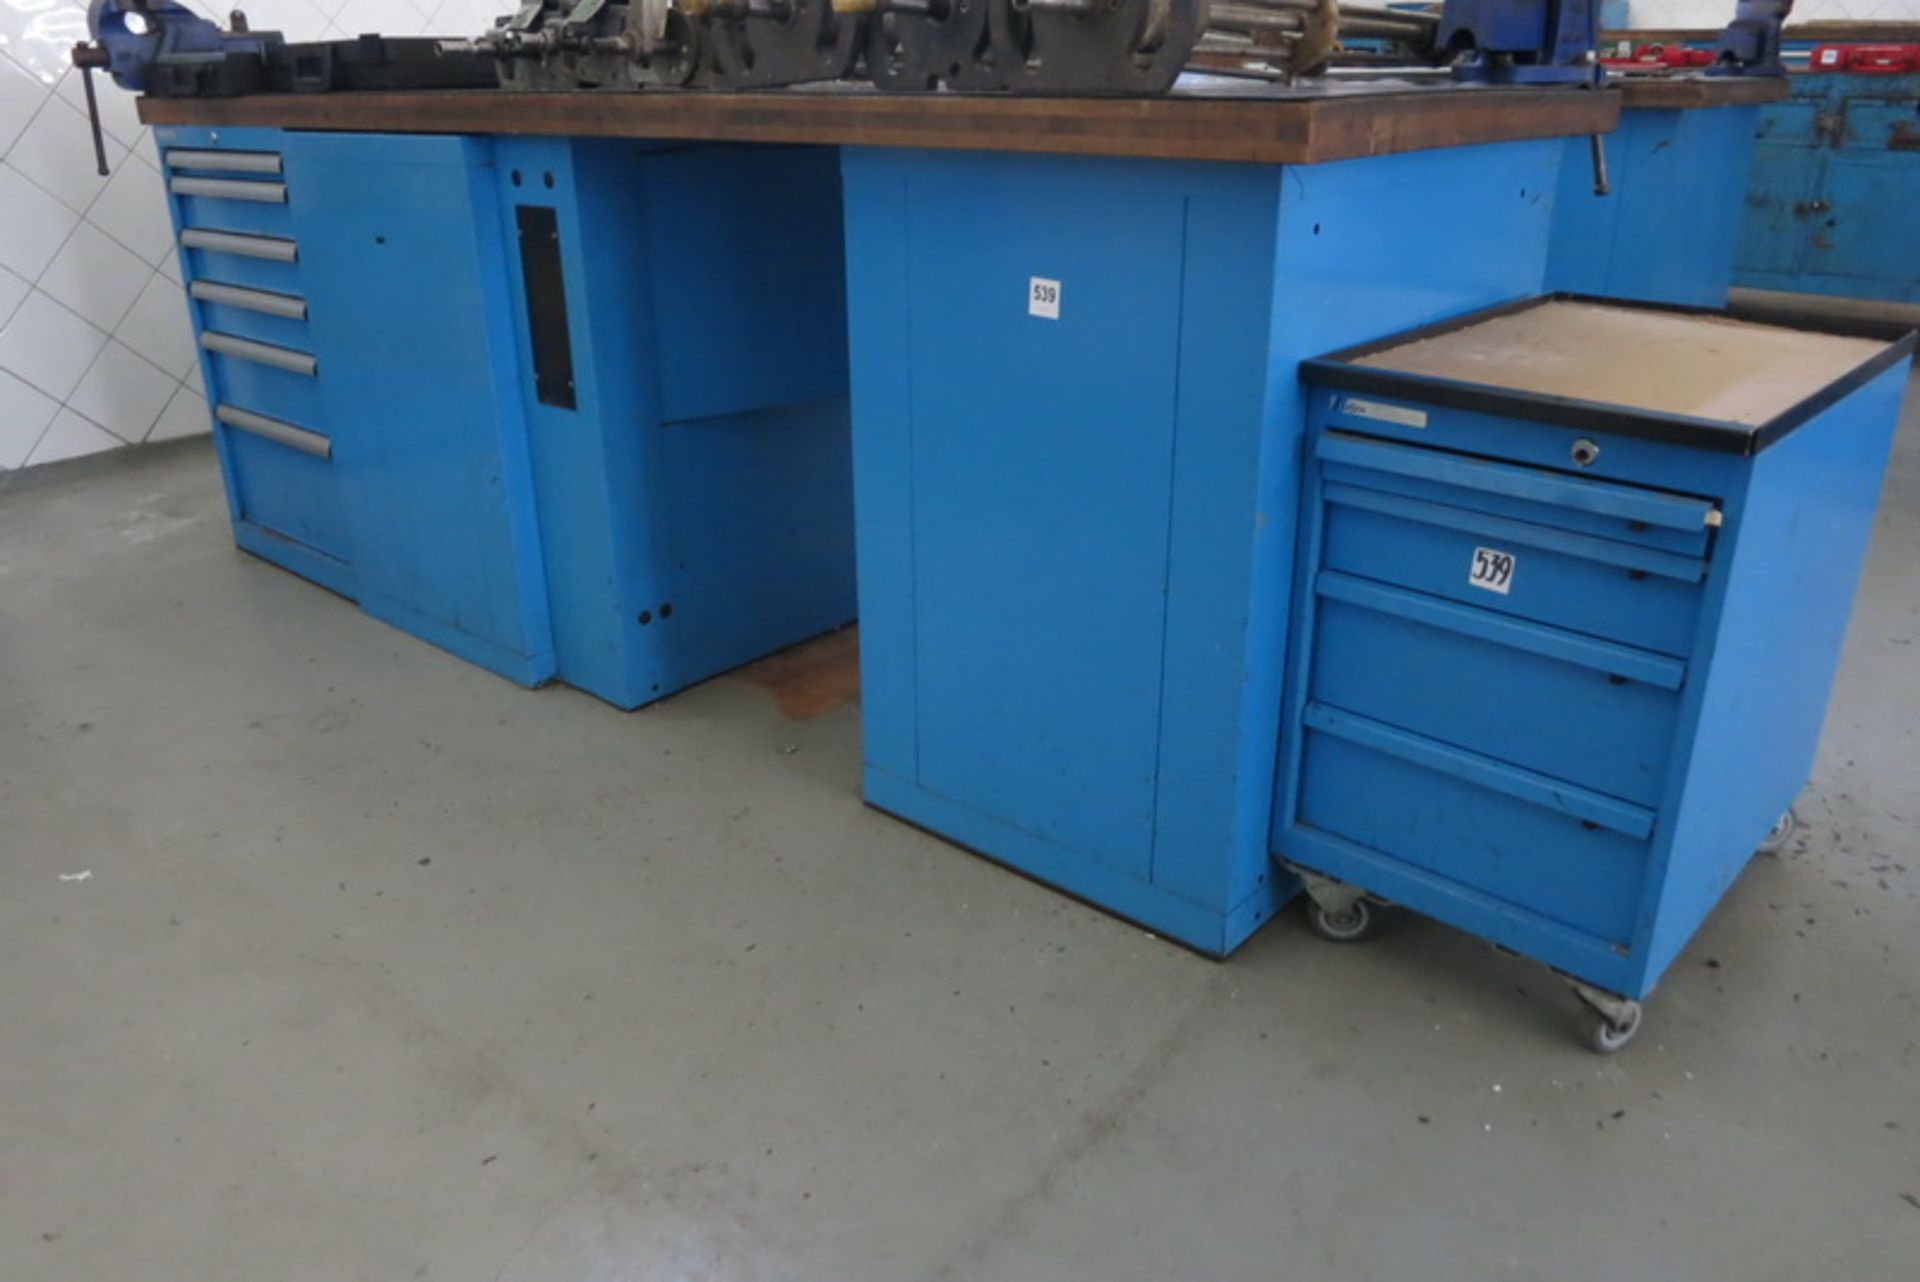 Lista work bench, with 3-parts drawers, (2) vises & mobile cabinet